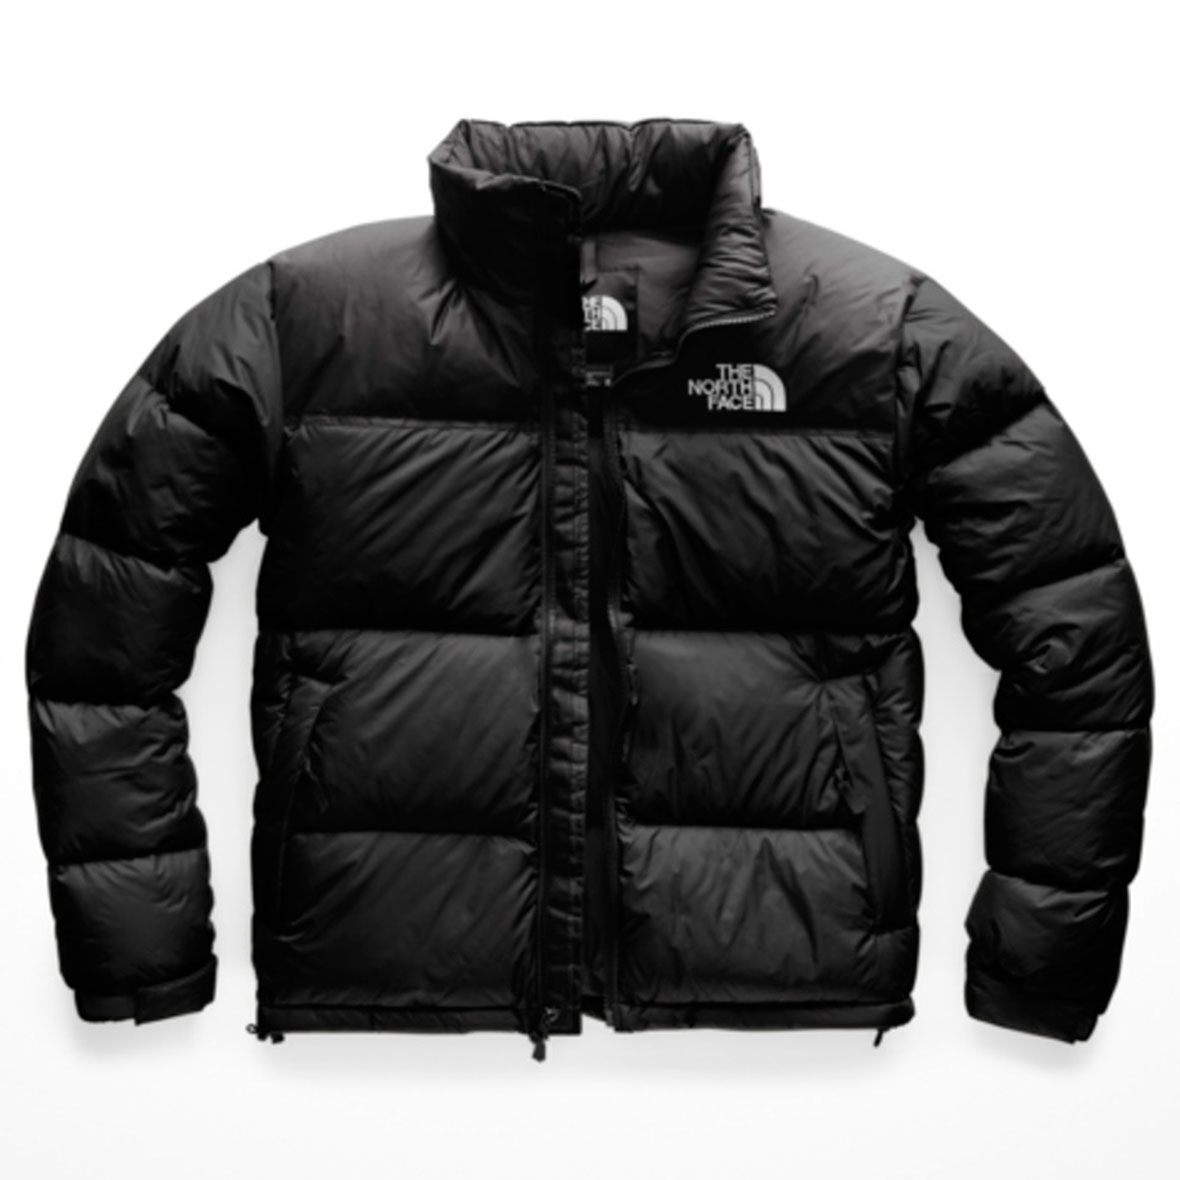 north face jacket mens price